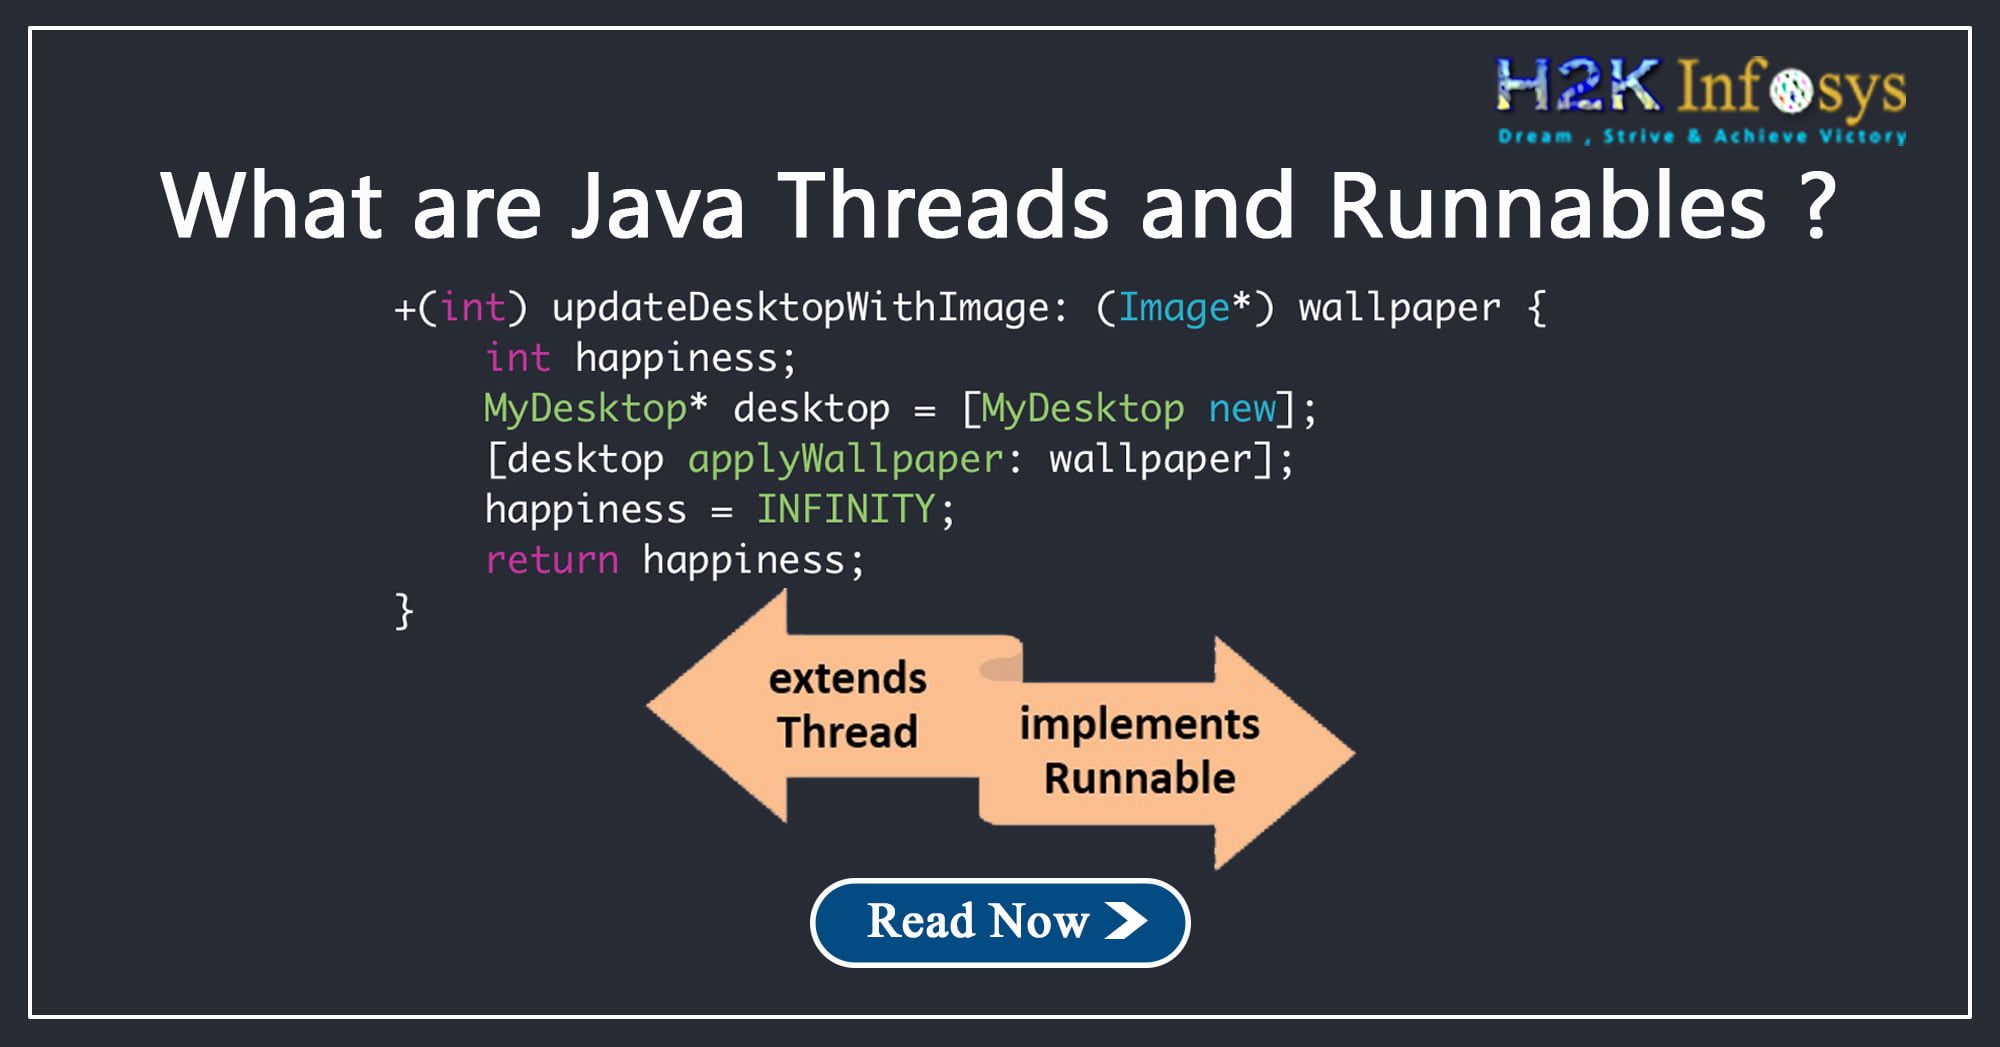 Extends Thread Vs Implements Runnable In Java